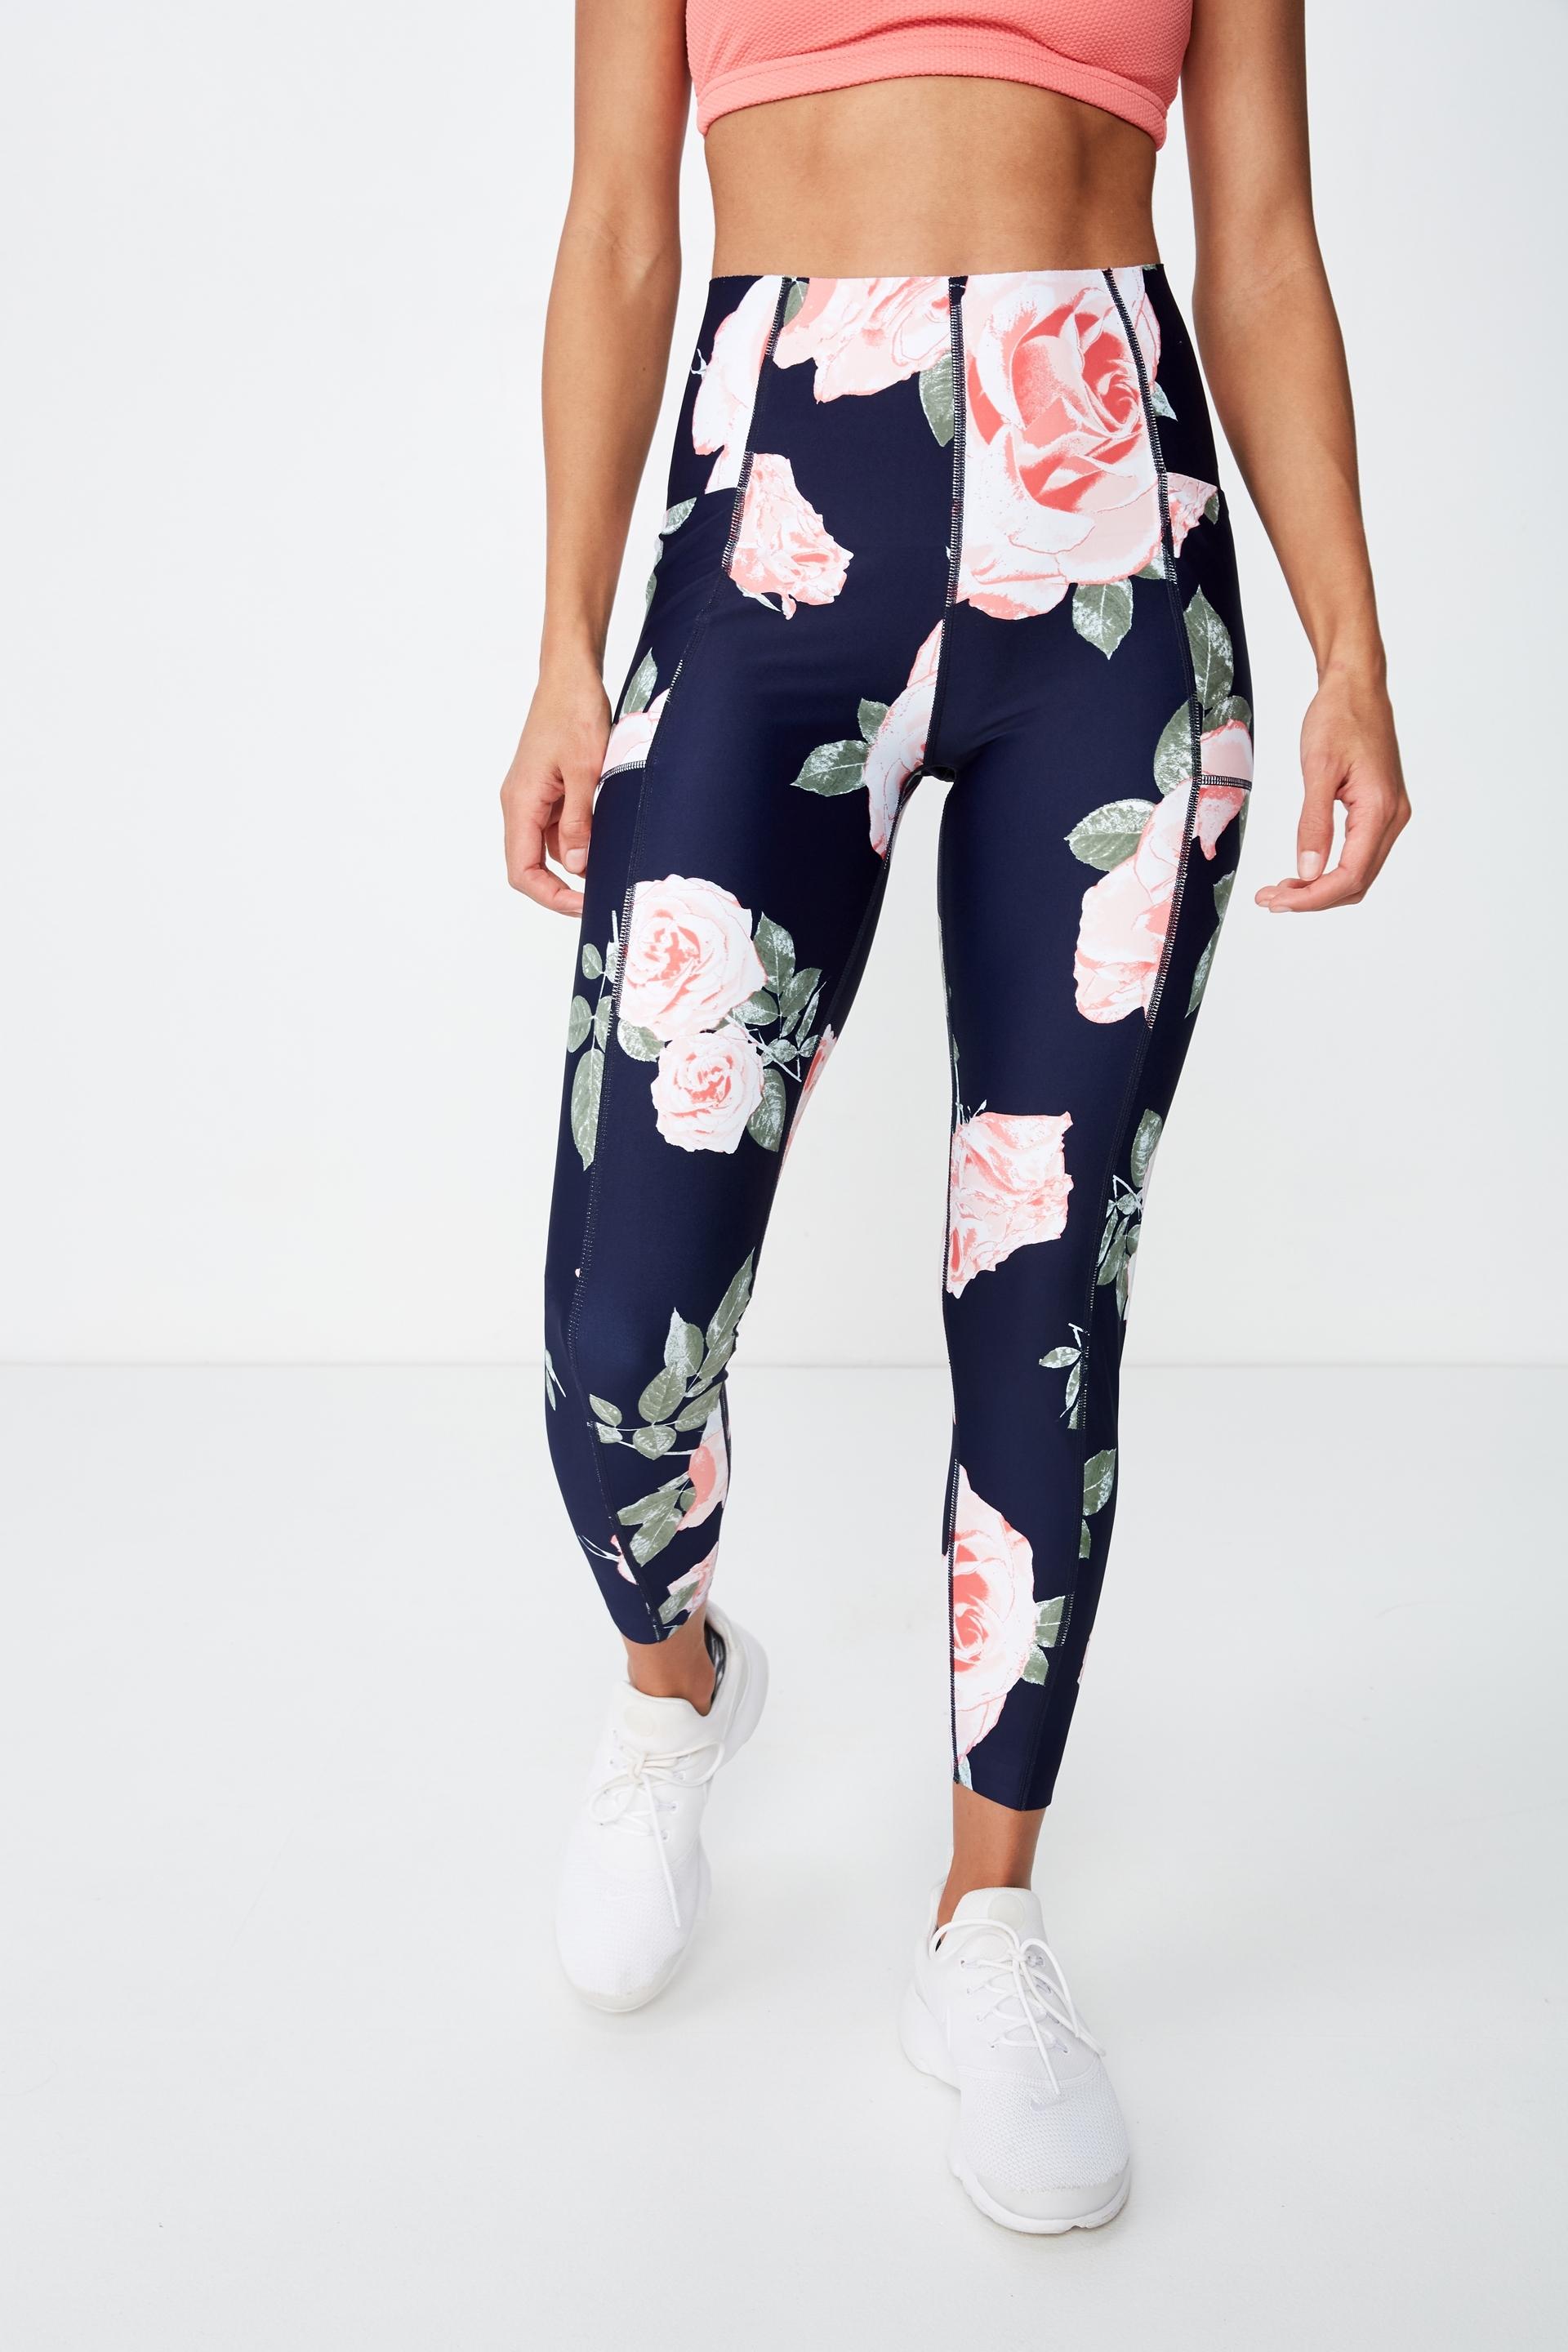 Bonded 7/8 tight - atomic roses Cotton On Bottoms | Superbalist.com